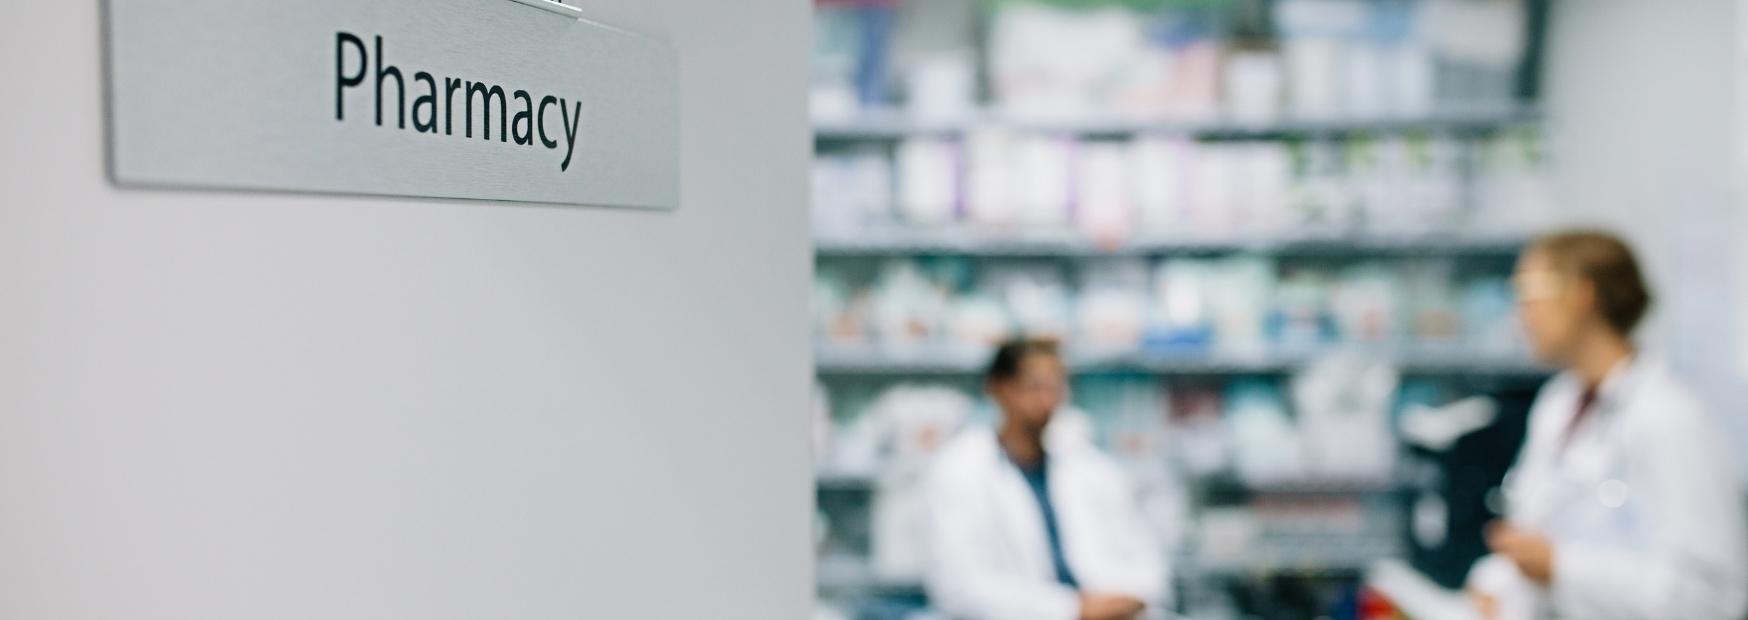 Online Associates in Pharmacy - featured image